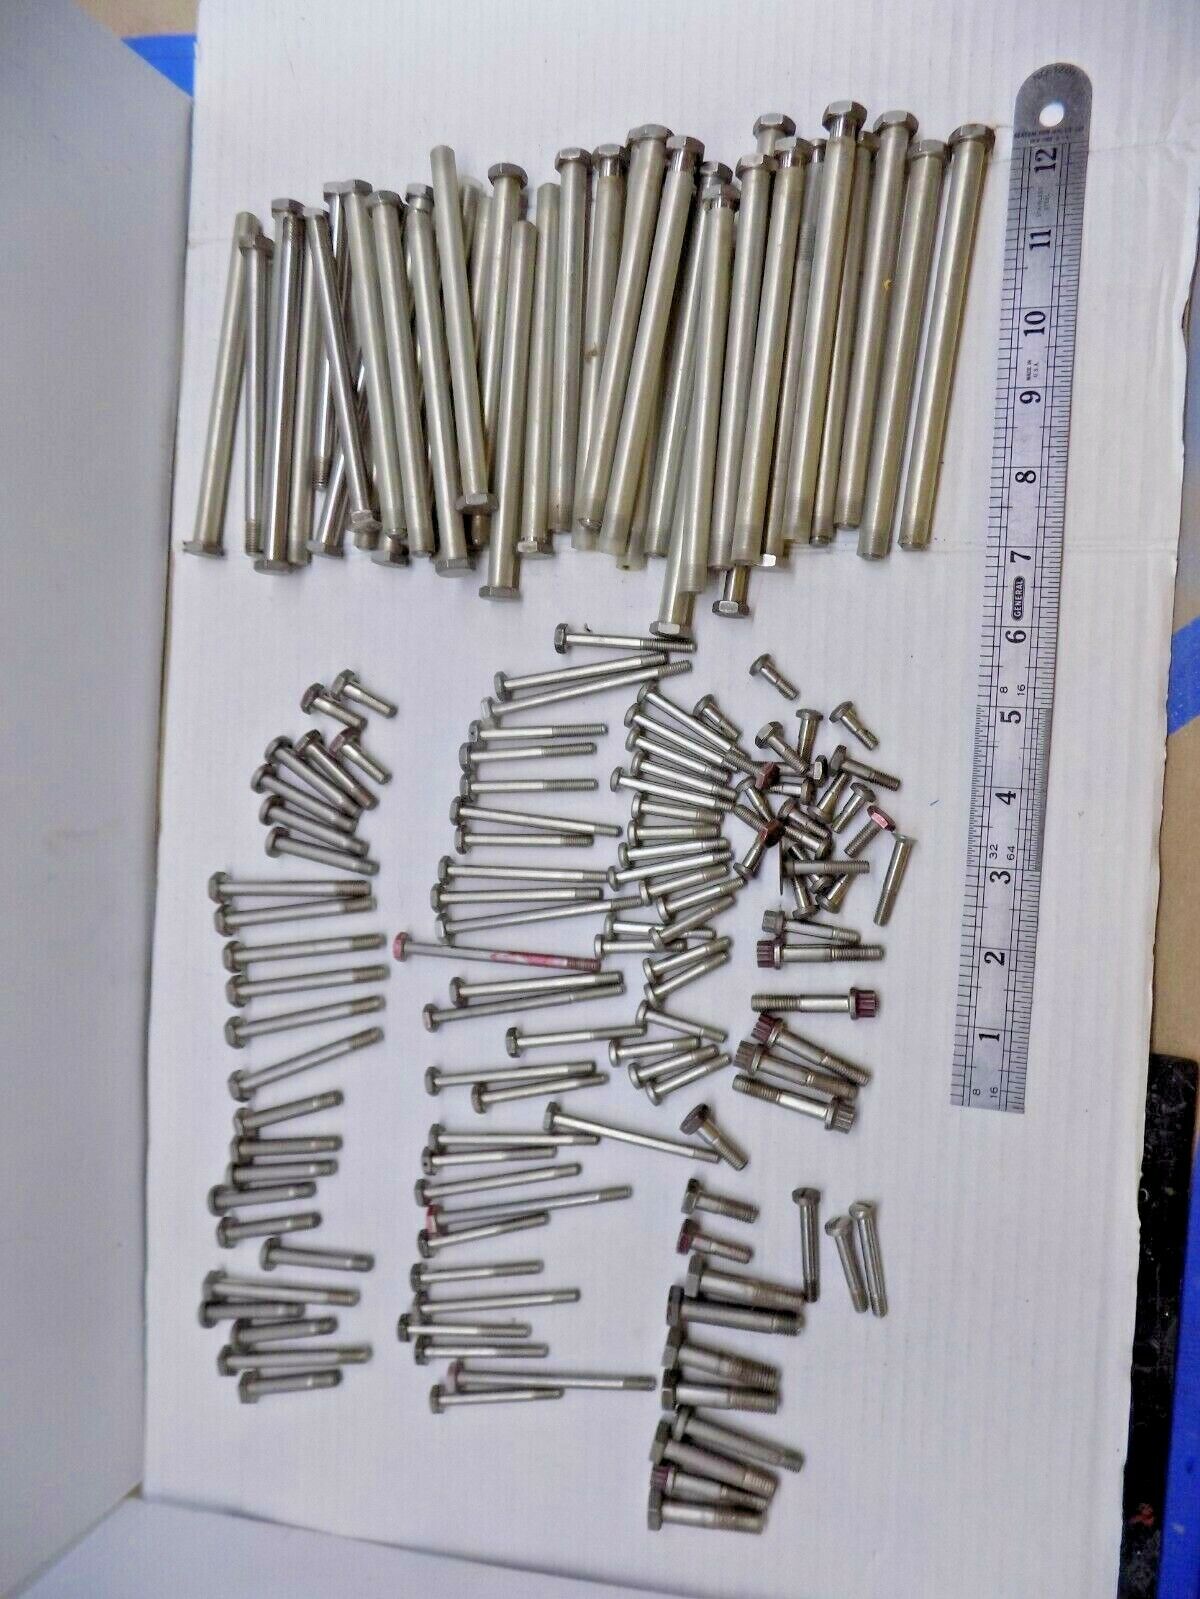 AEROSPACE HARDWARE, LOT OF 150 pcs. N.A.S. INCONEL BOLTS, VARIOUS SIZES, 